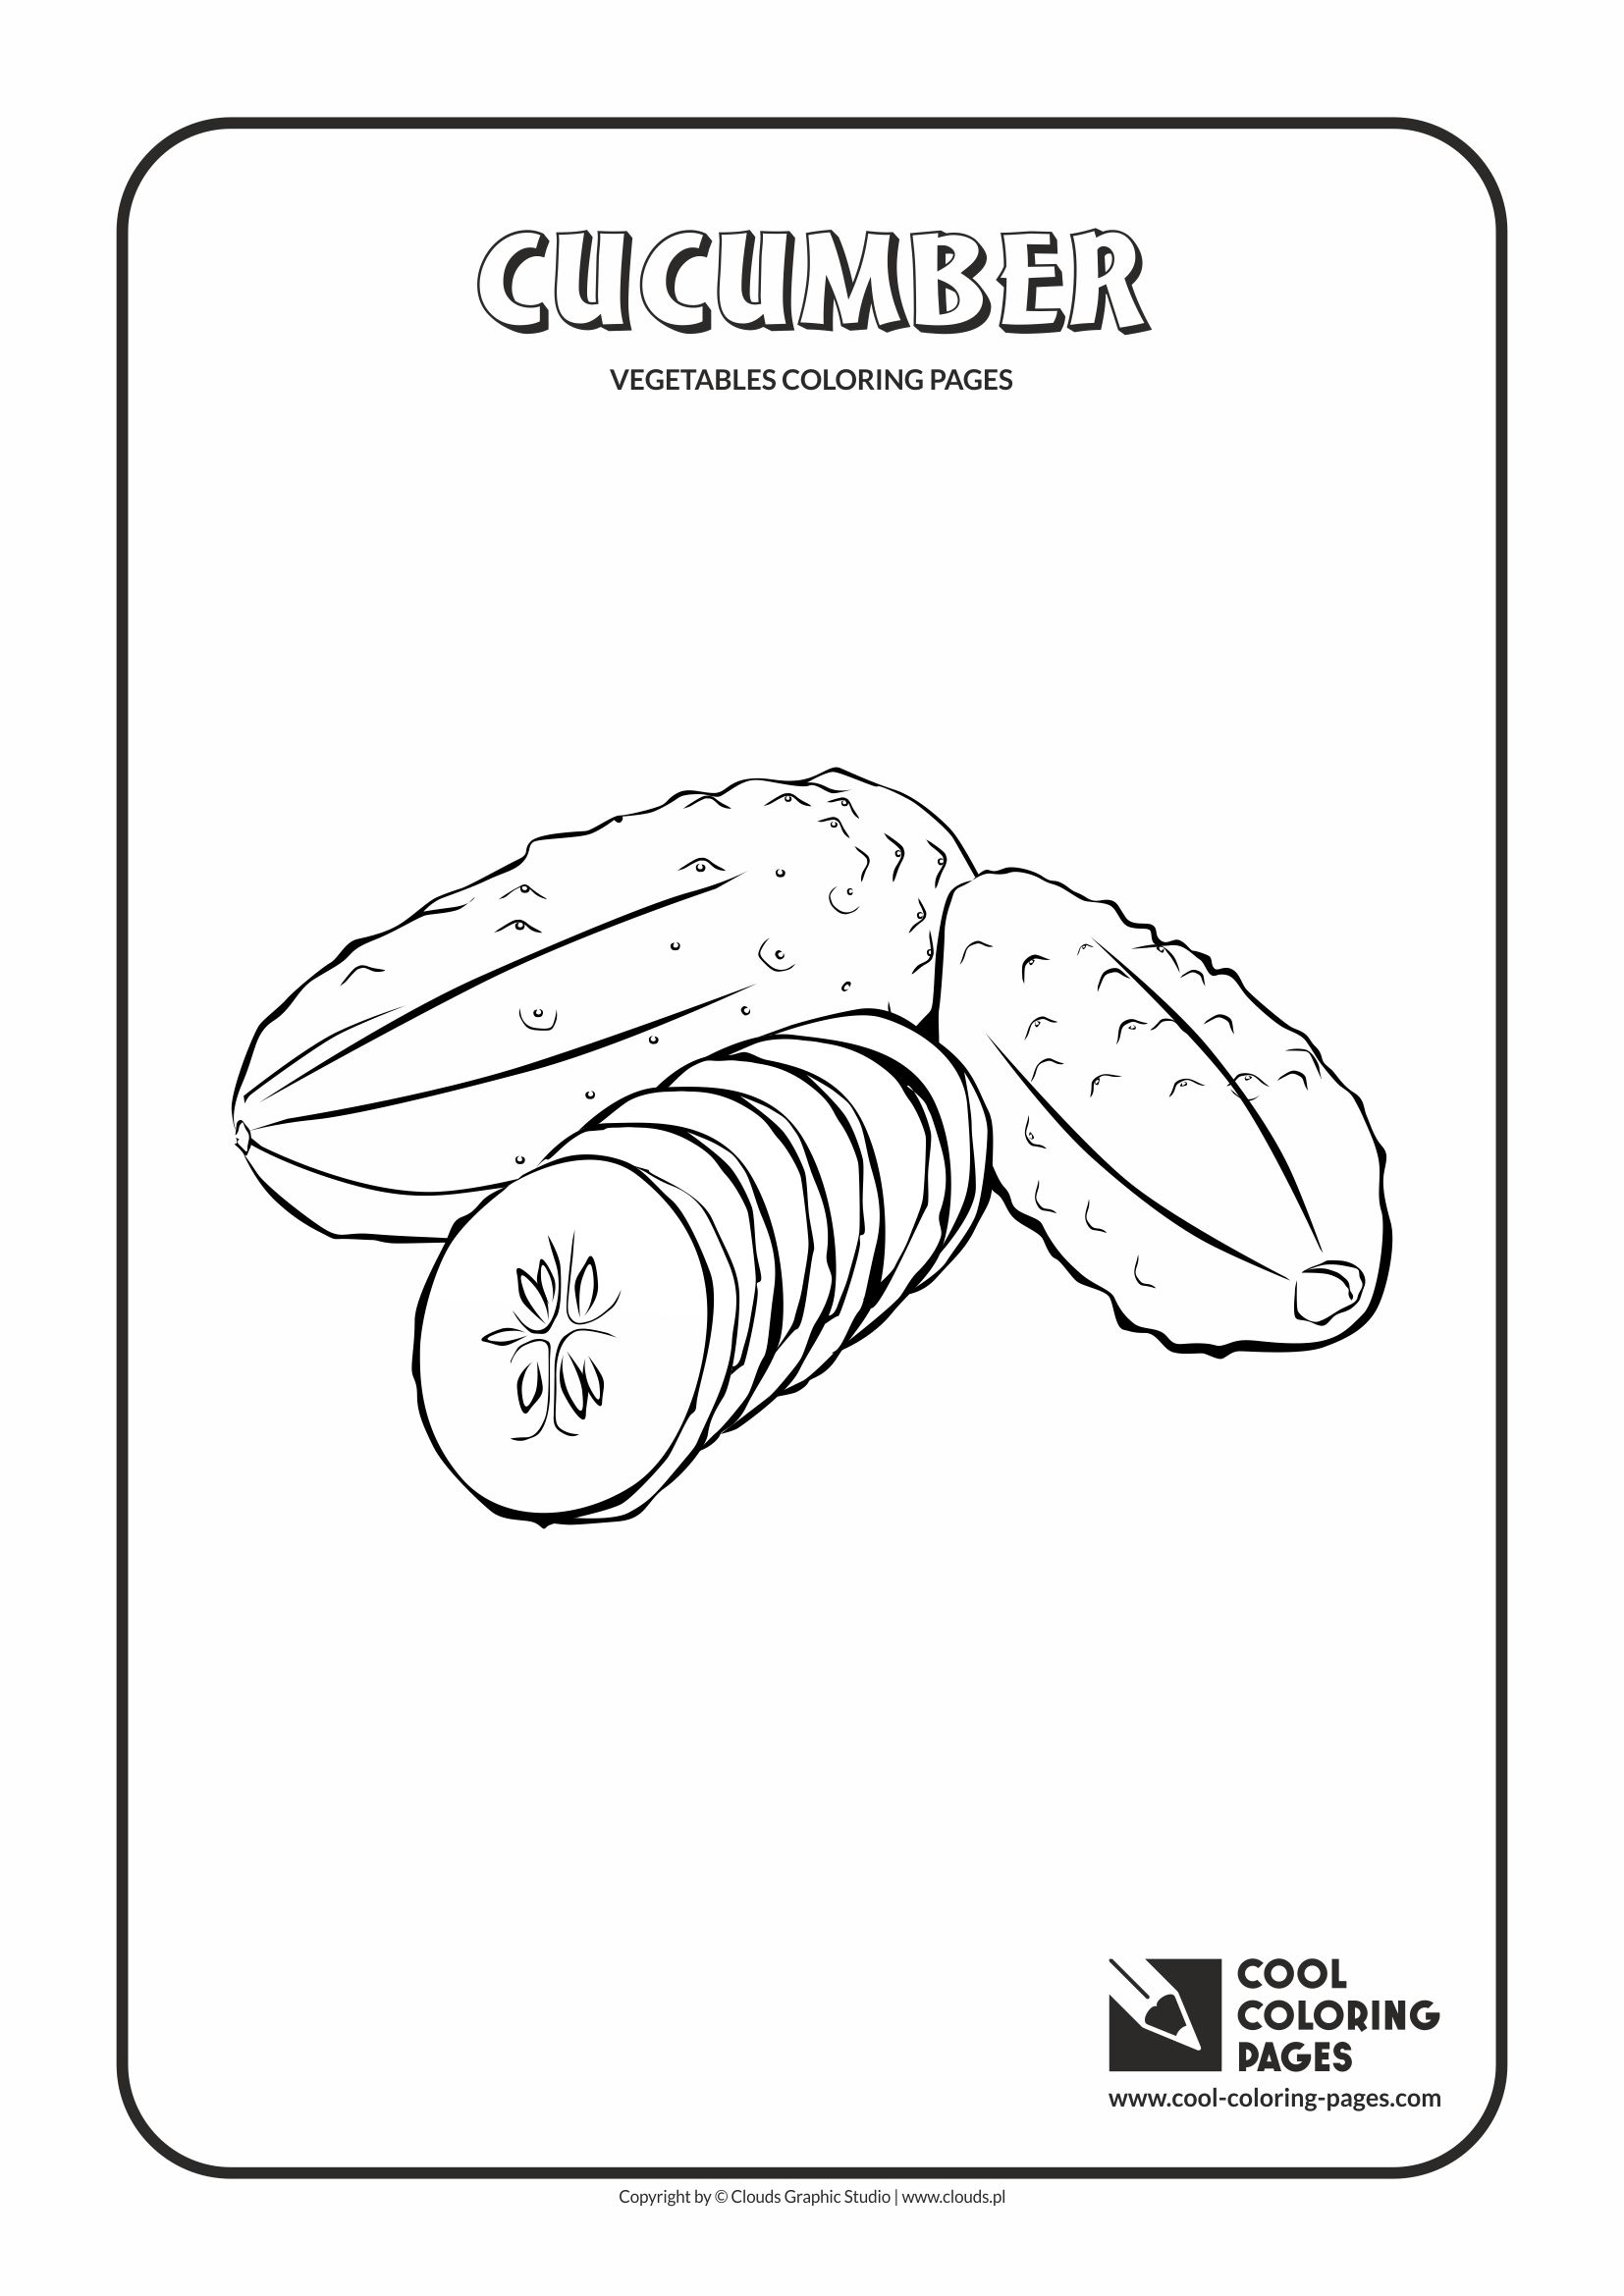 Cool Coloring Pages - Plants / Cucumber / Coloring page with cucumber